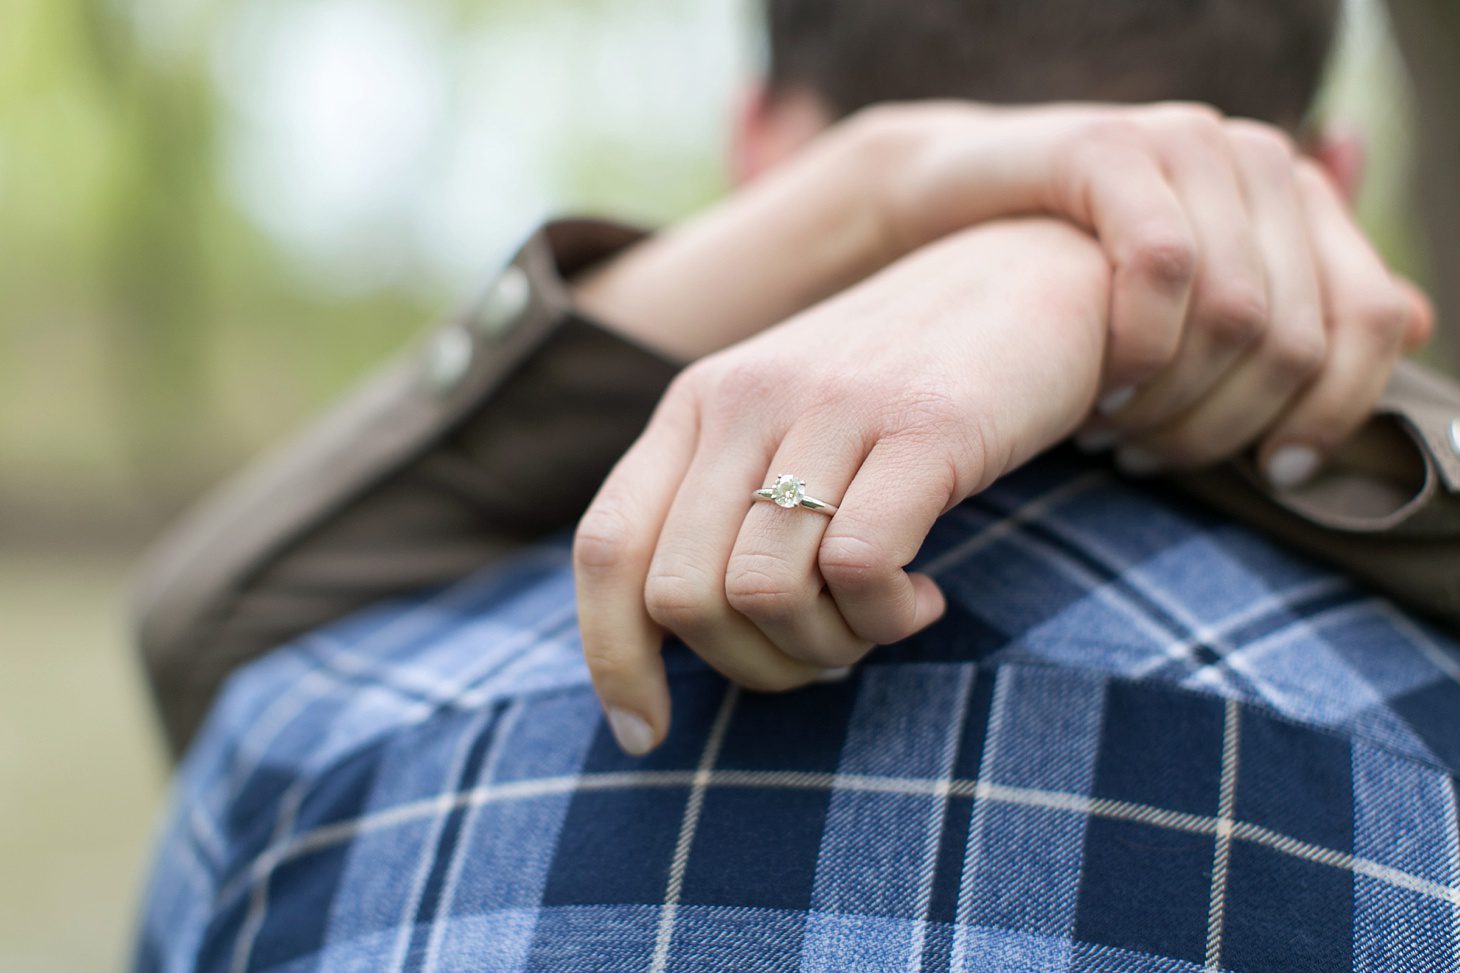 Gompers Park Chicago Engagement by Christy Tyler Photography_0005